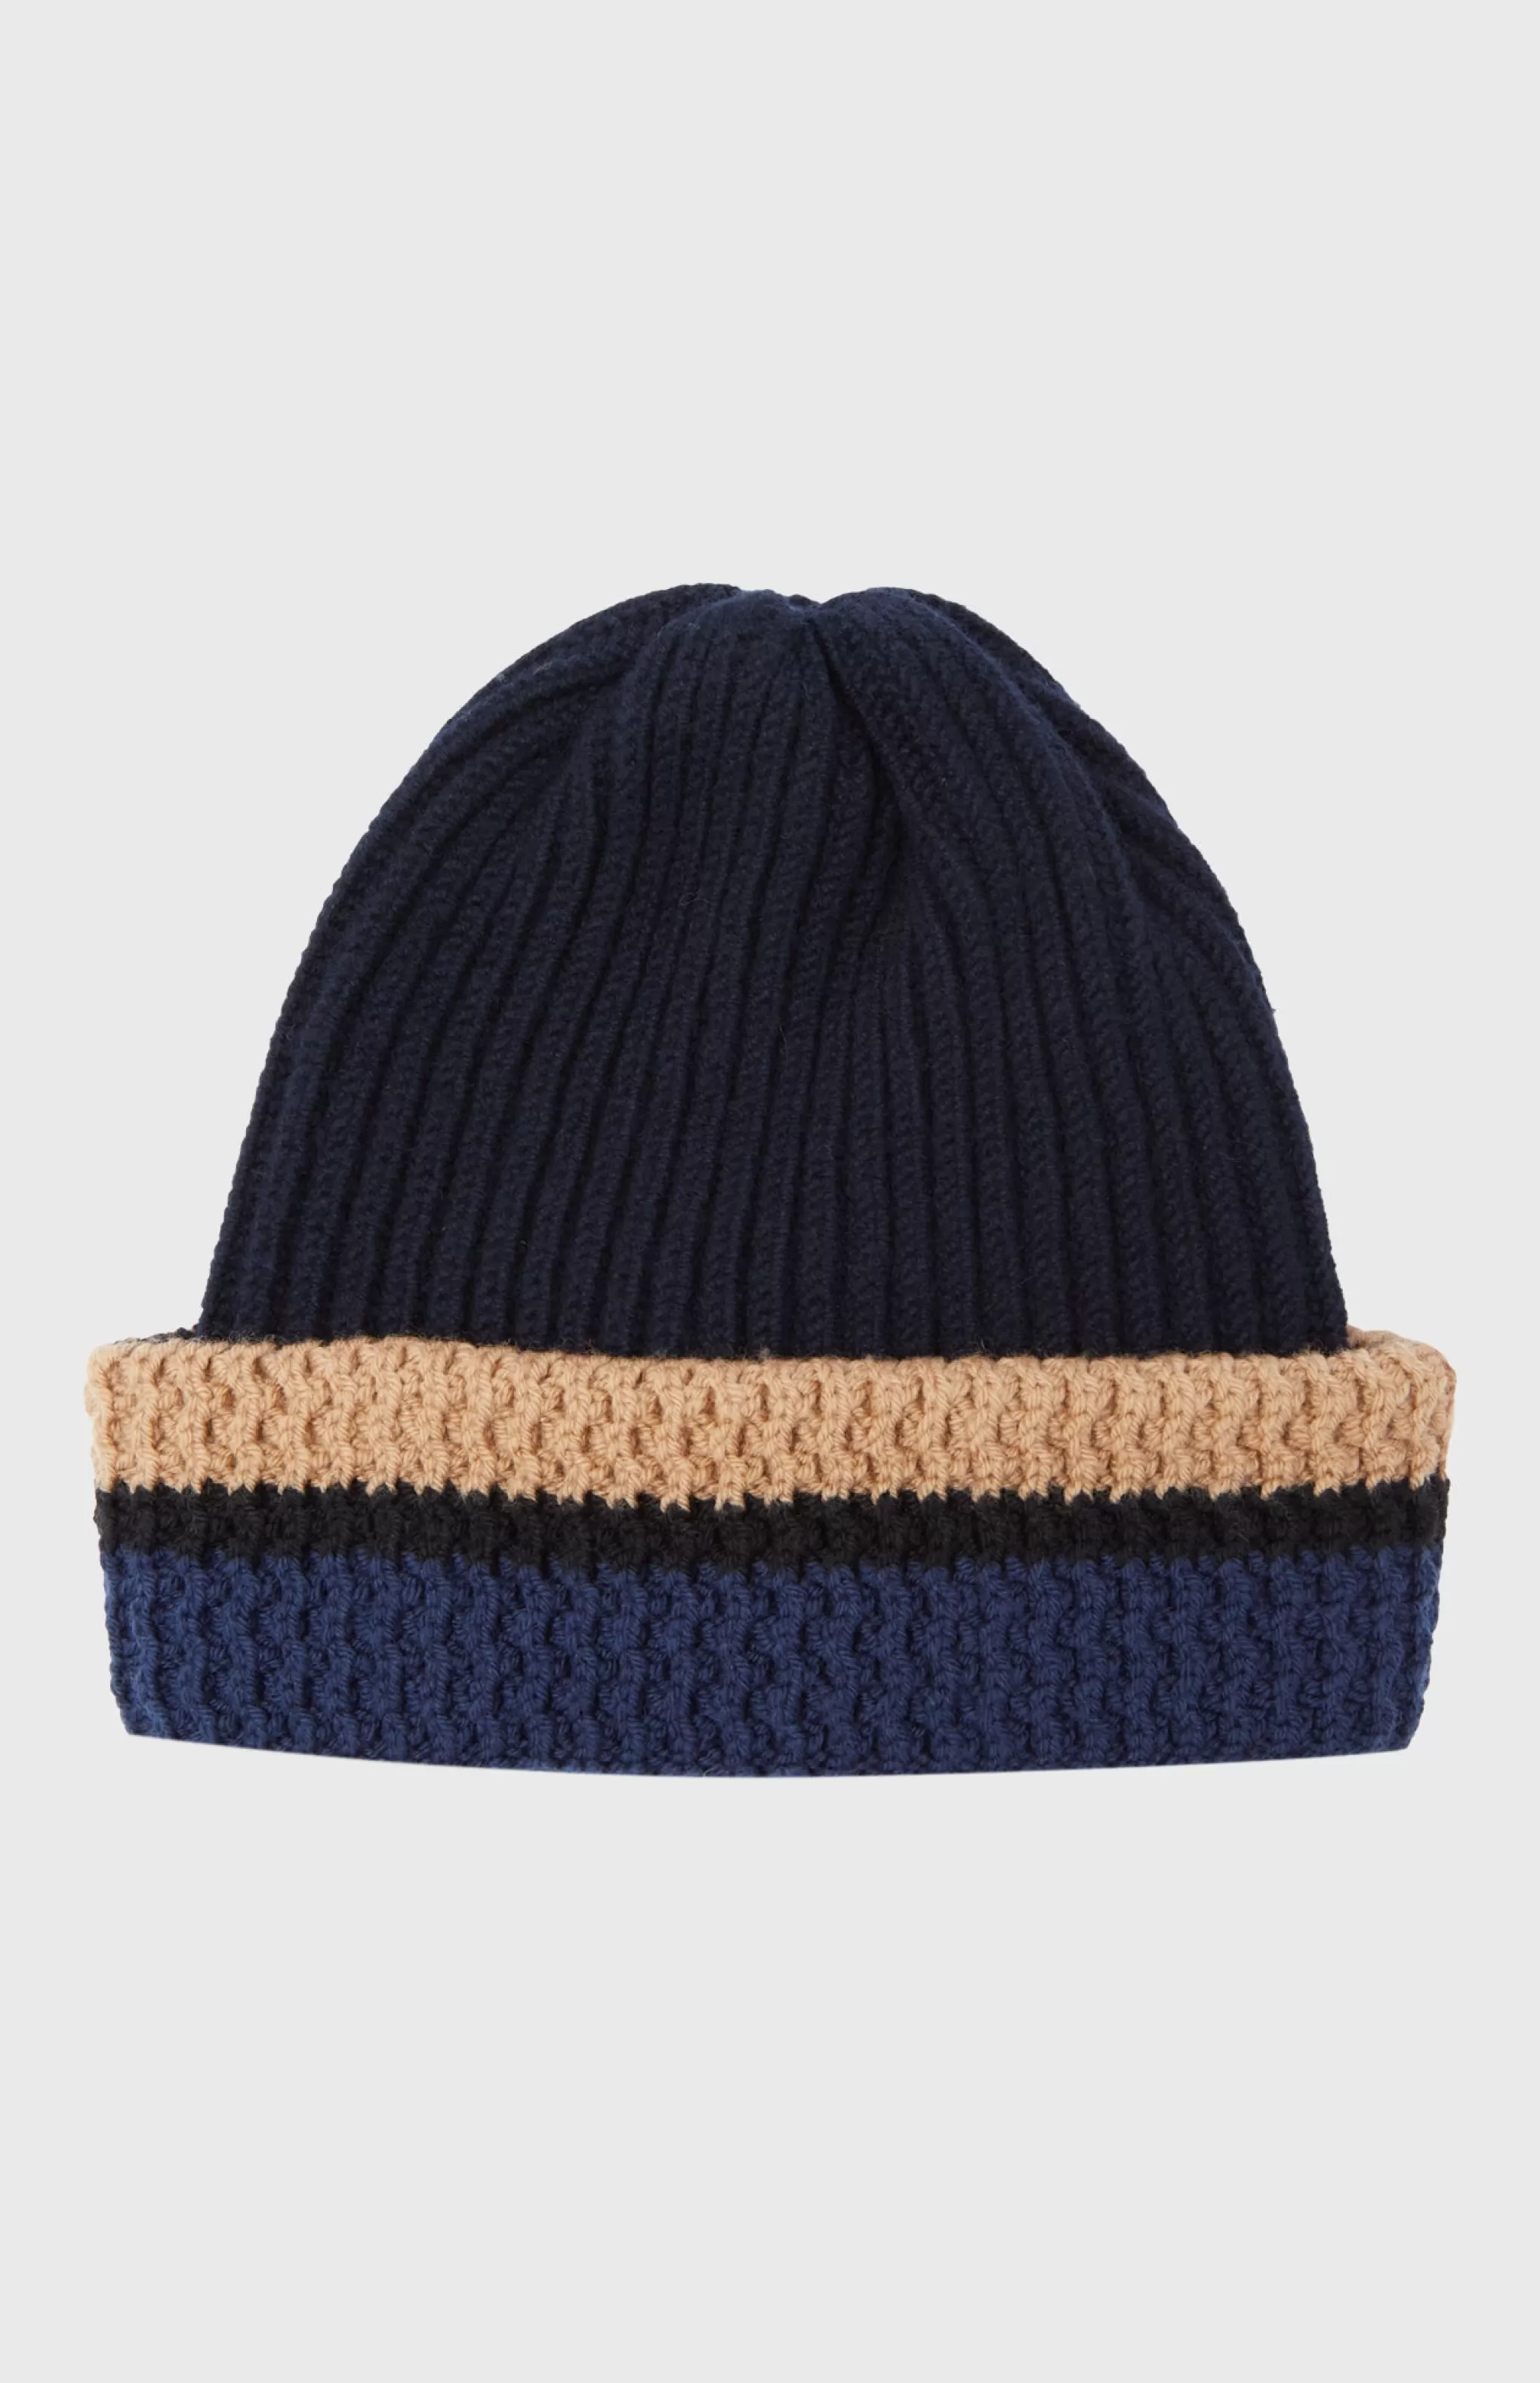 Best Sale Beanie With Allover Chunky Cardigan Rib In Navy Men Gifts for Men